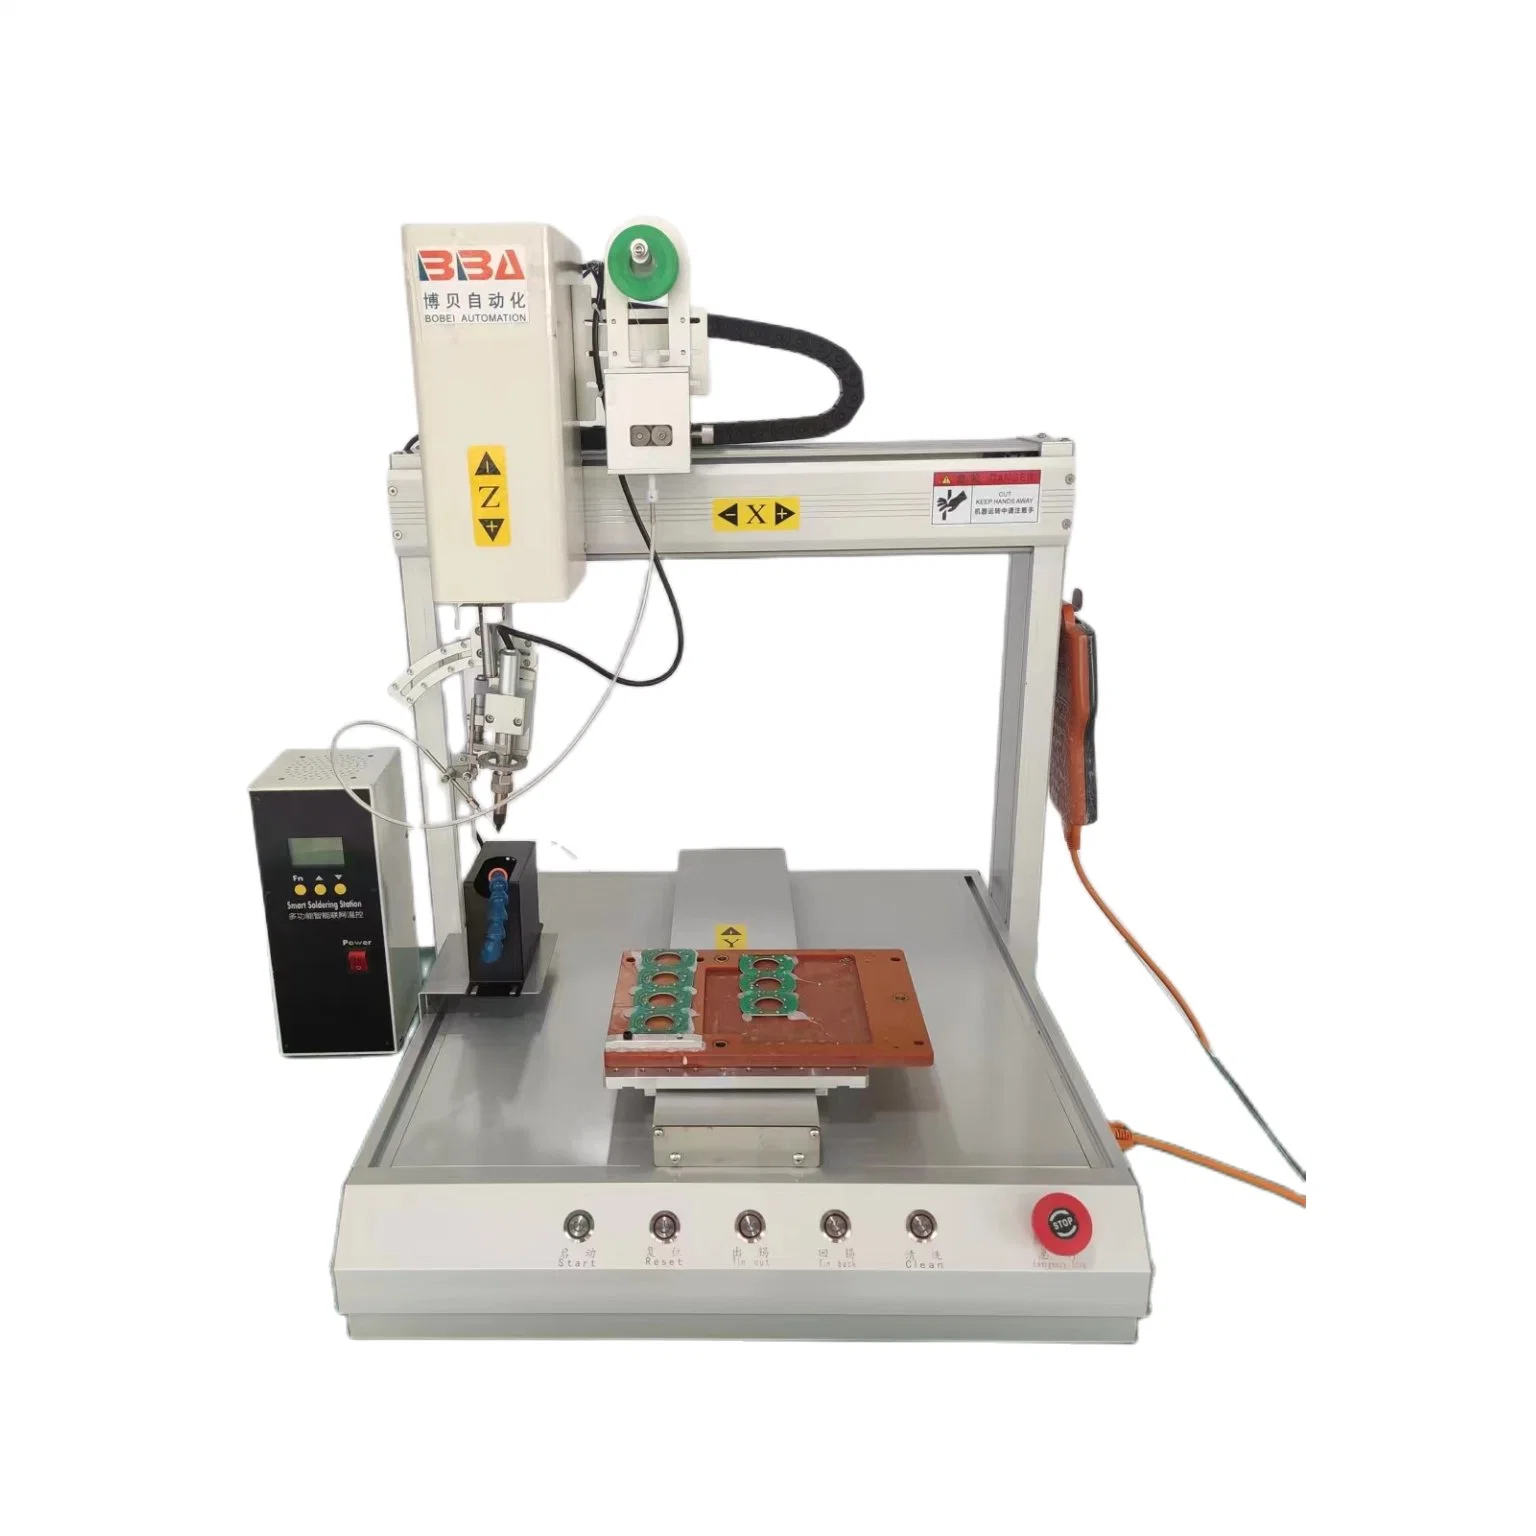 Bba Automatic Soldering Machine Electronic Table Top Plastic Phone Mobile Data Cable Wire USB PCB LED Strip Light Soldering Robot System